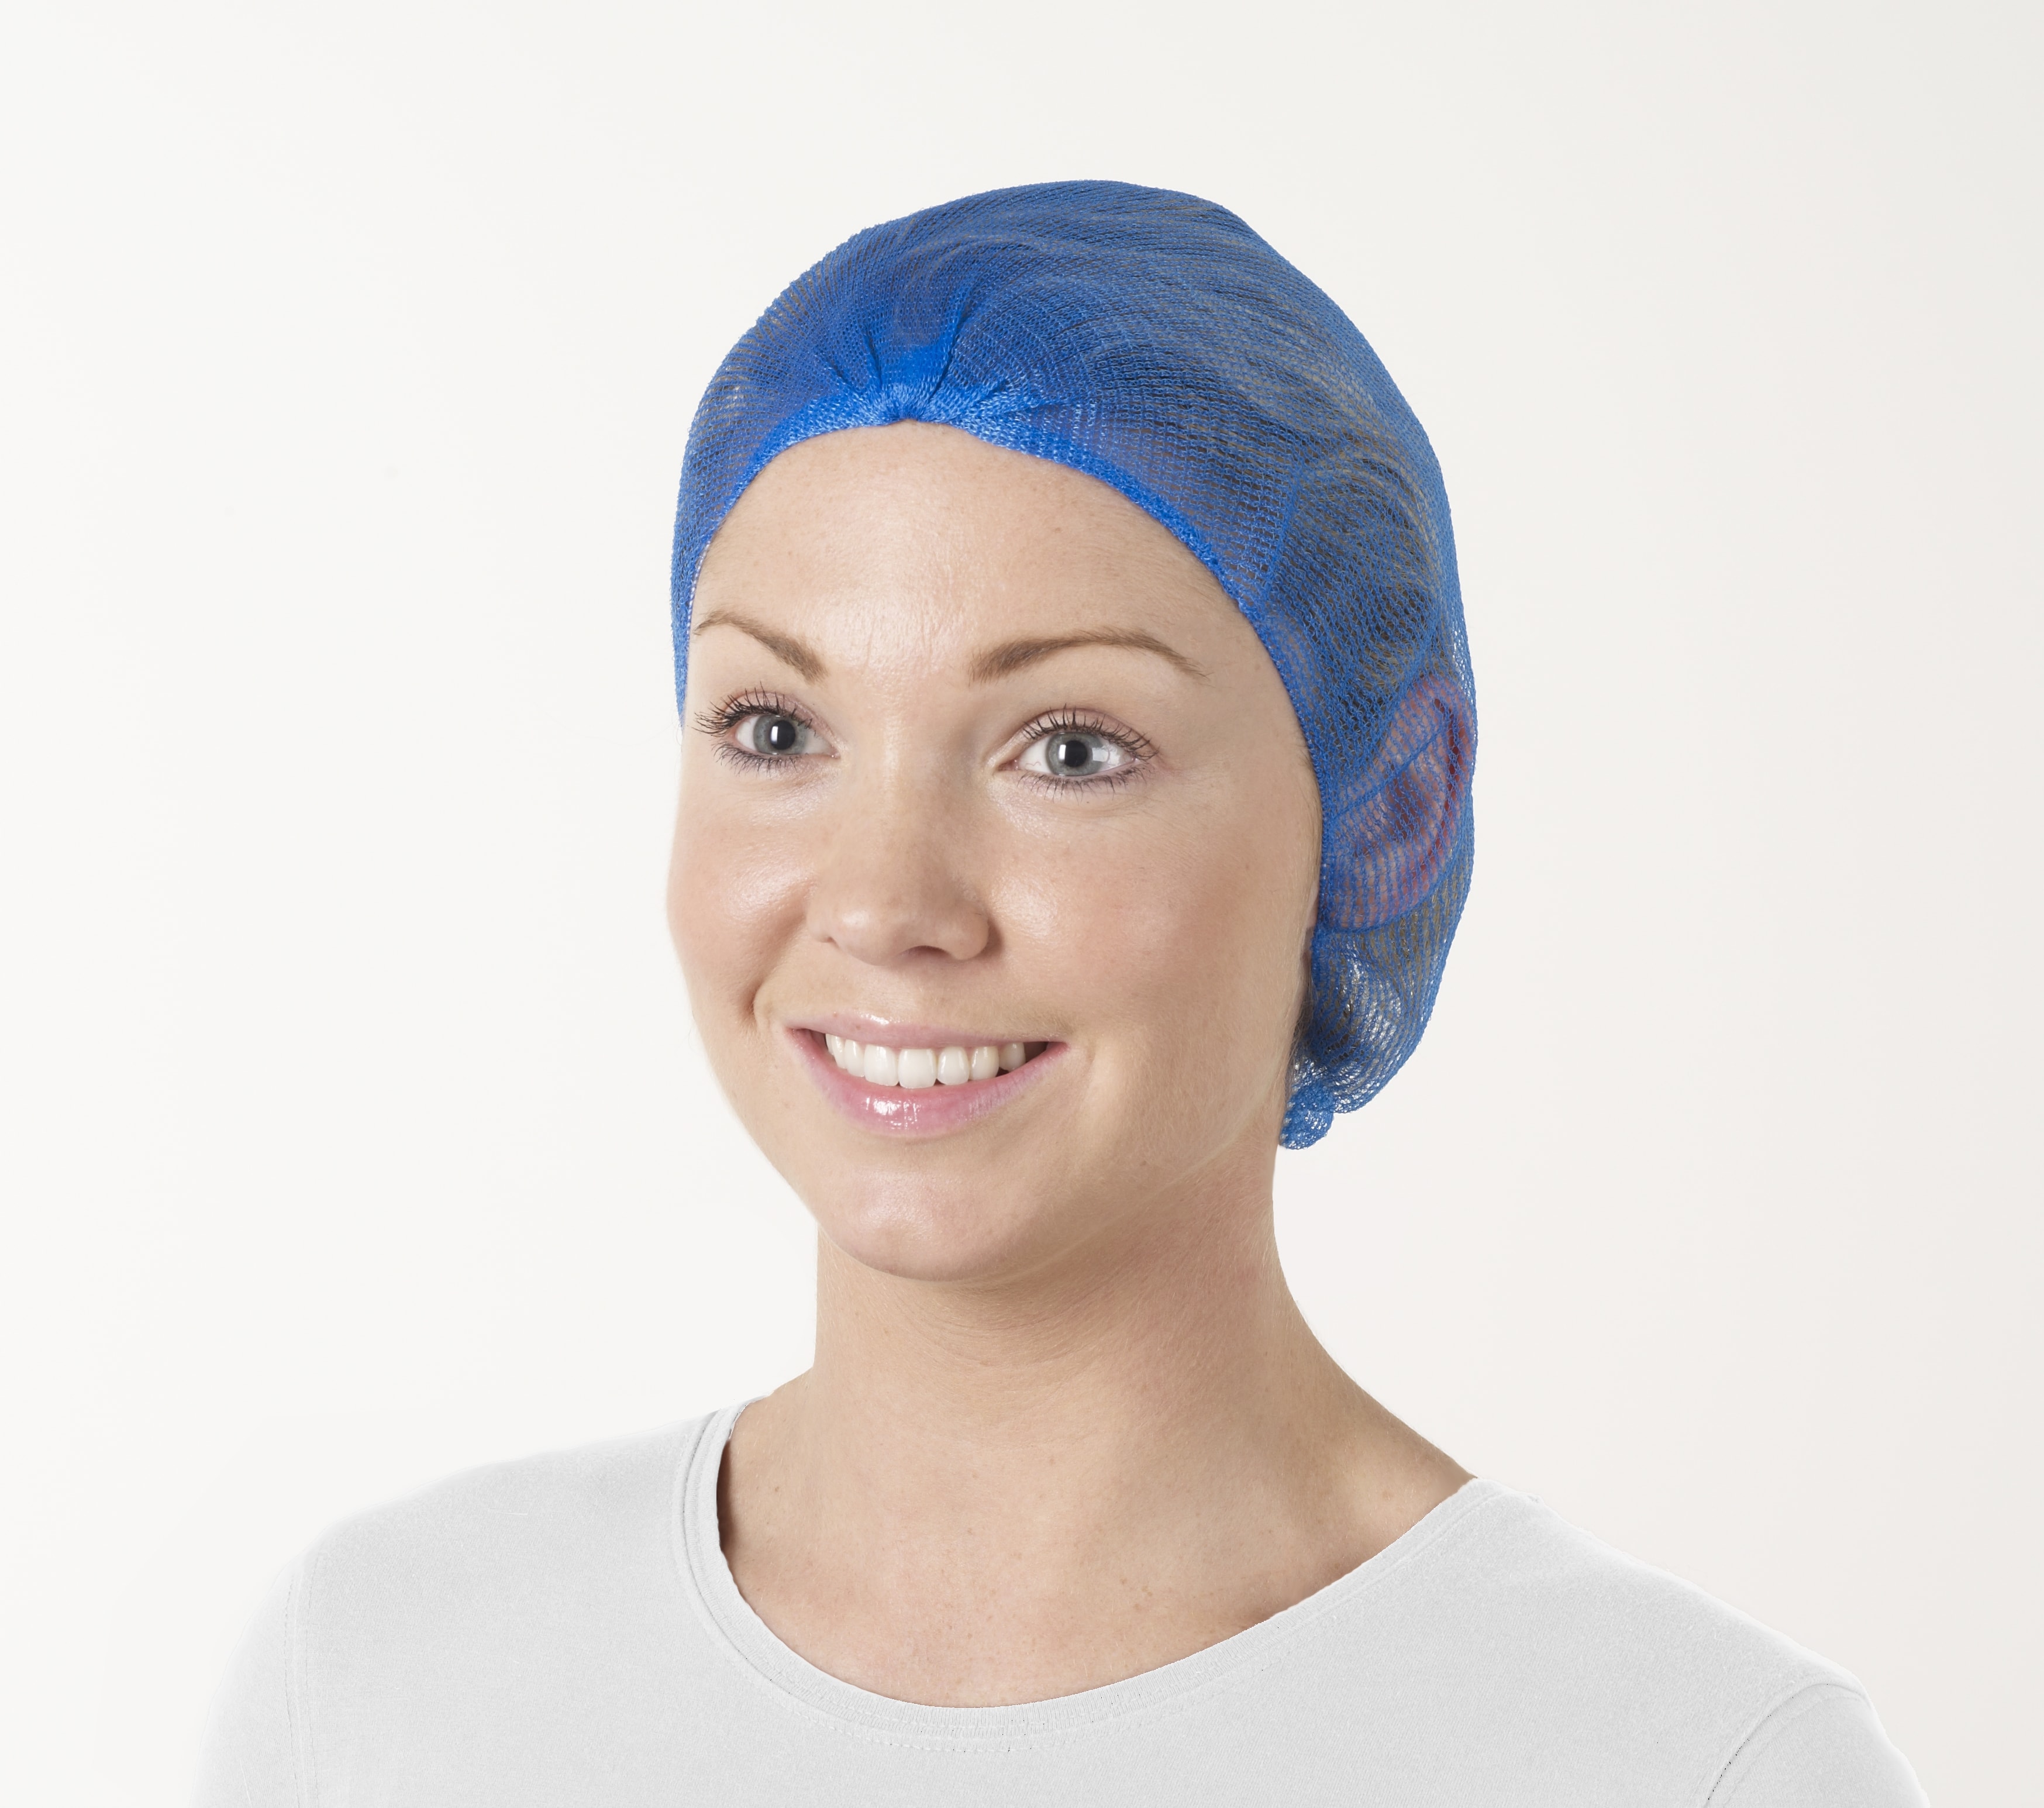 Comfortable Hair Nets Are Key